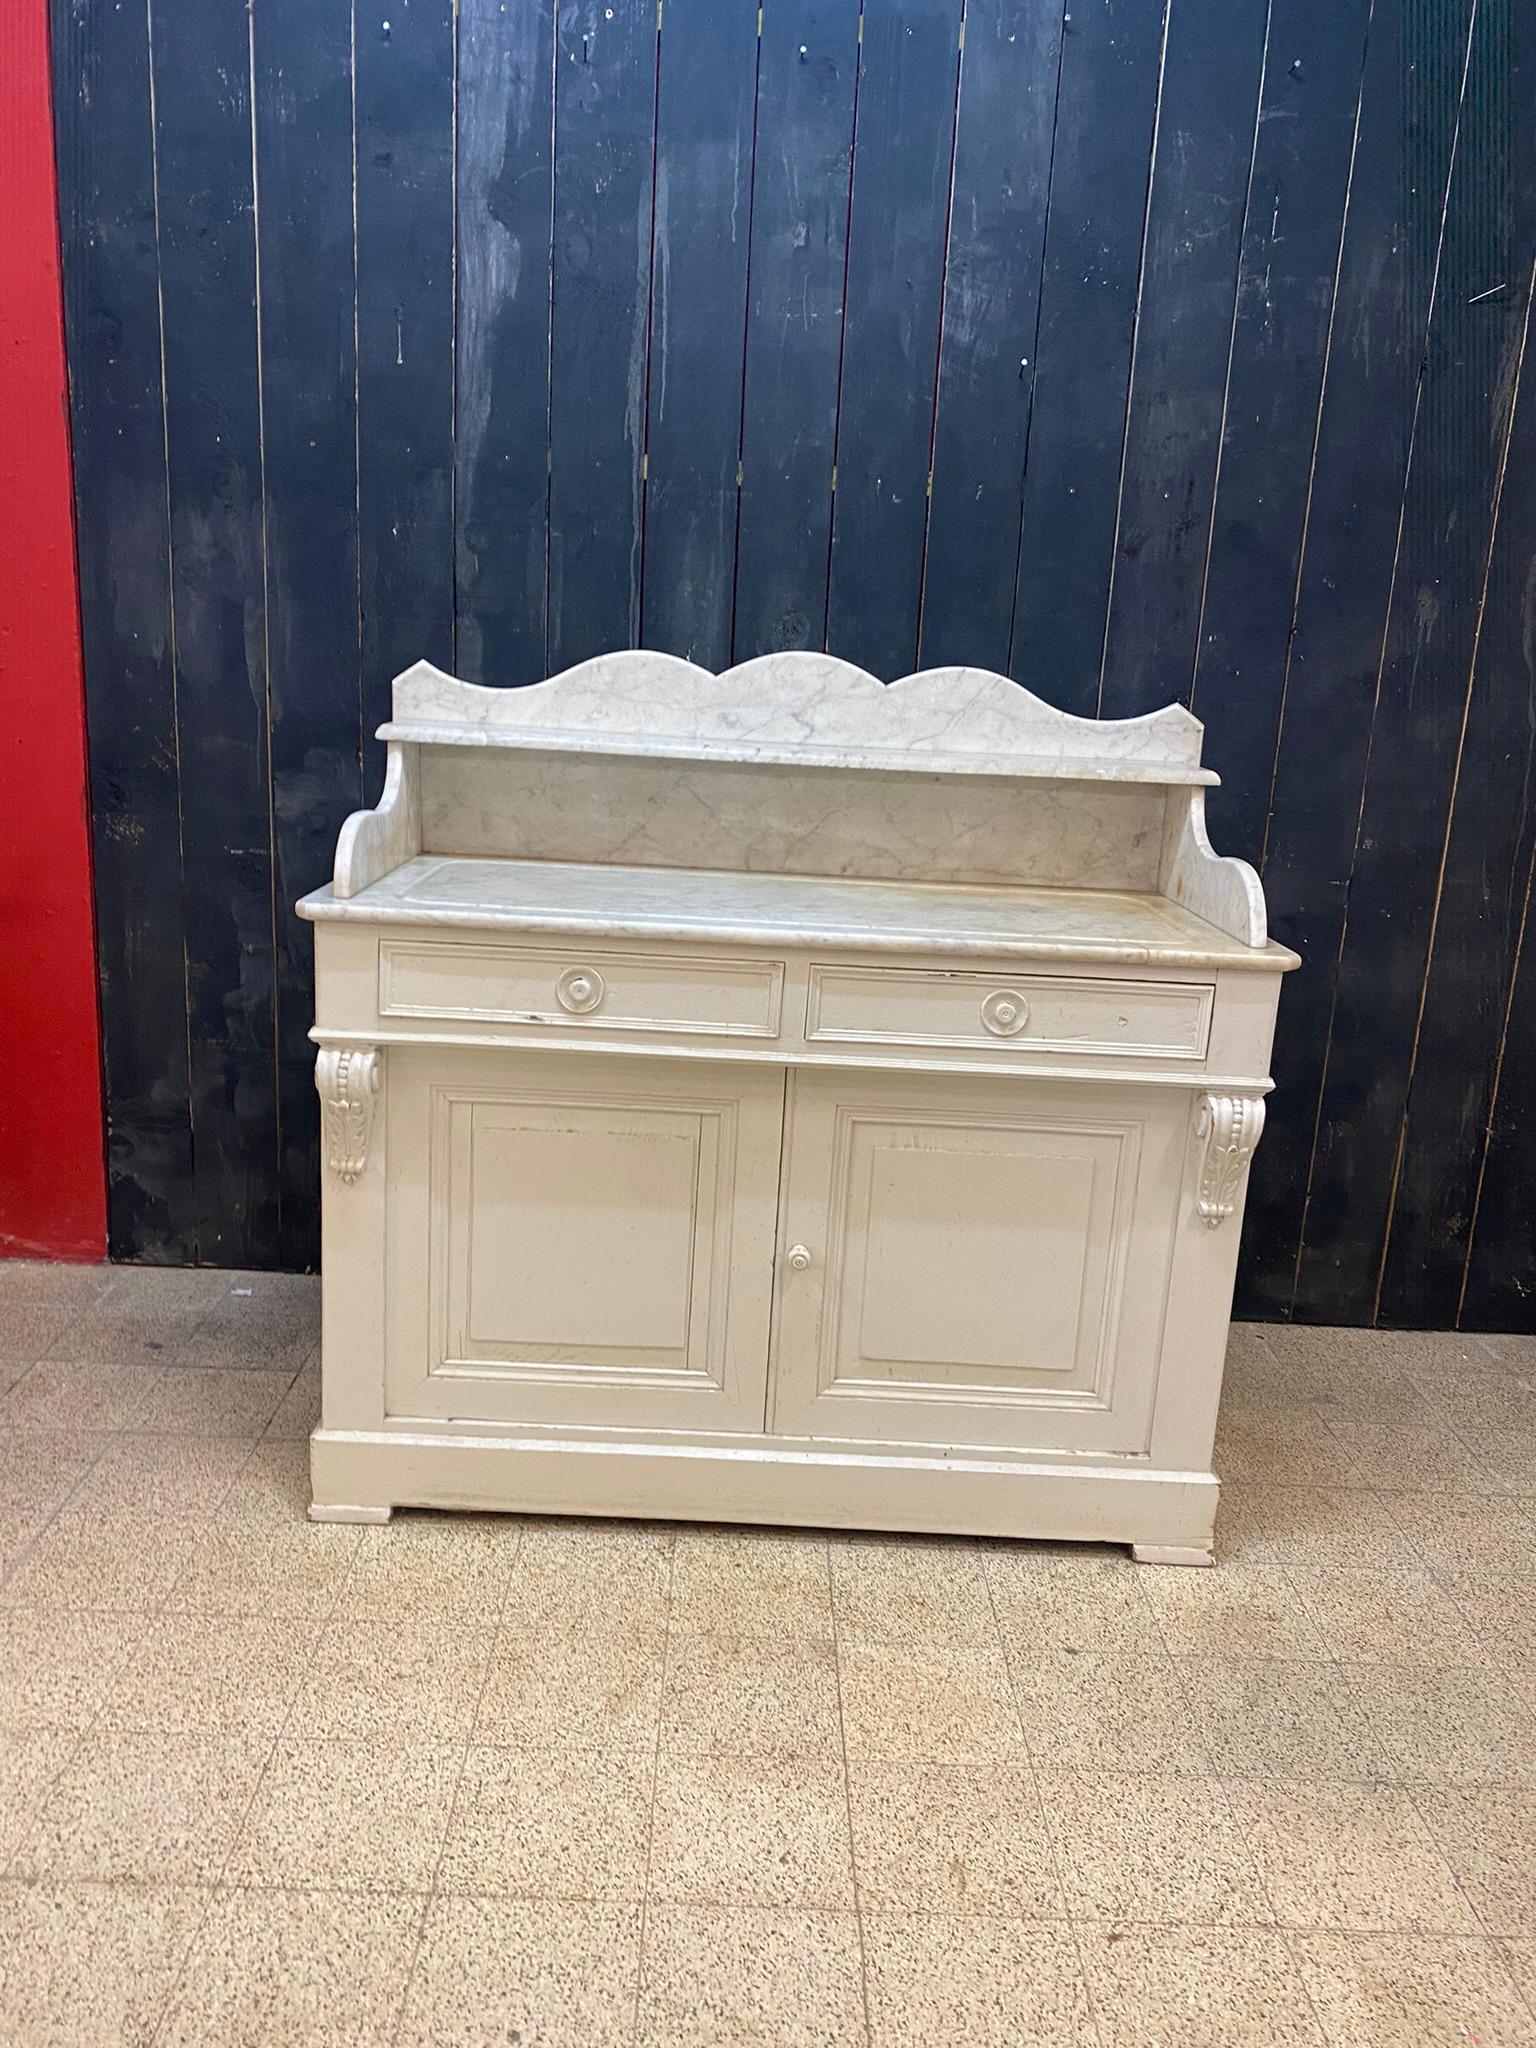 Antique vanity unit in painted wood and white marble, louis philippe style, 19th century.
Good general condition, yellowing stain on part of the marble.